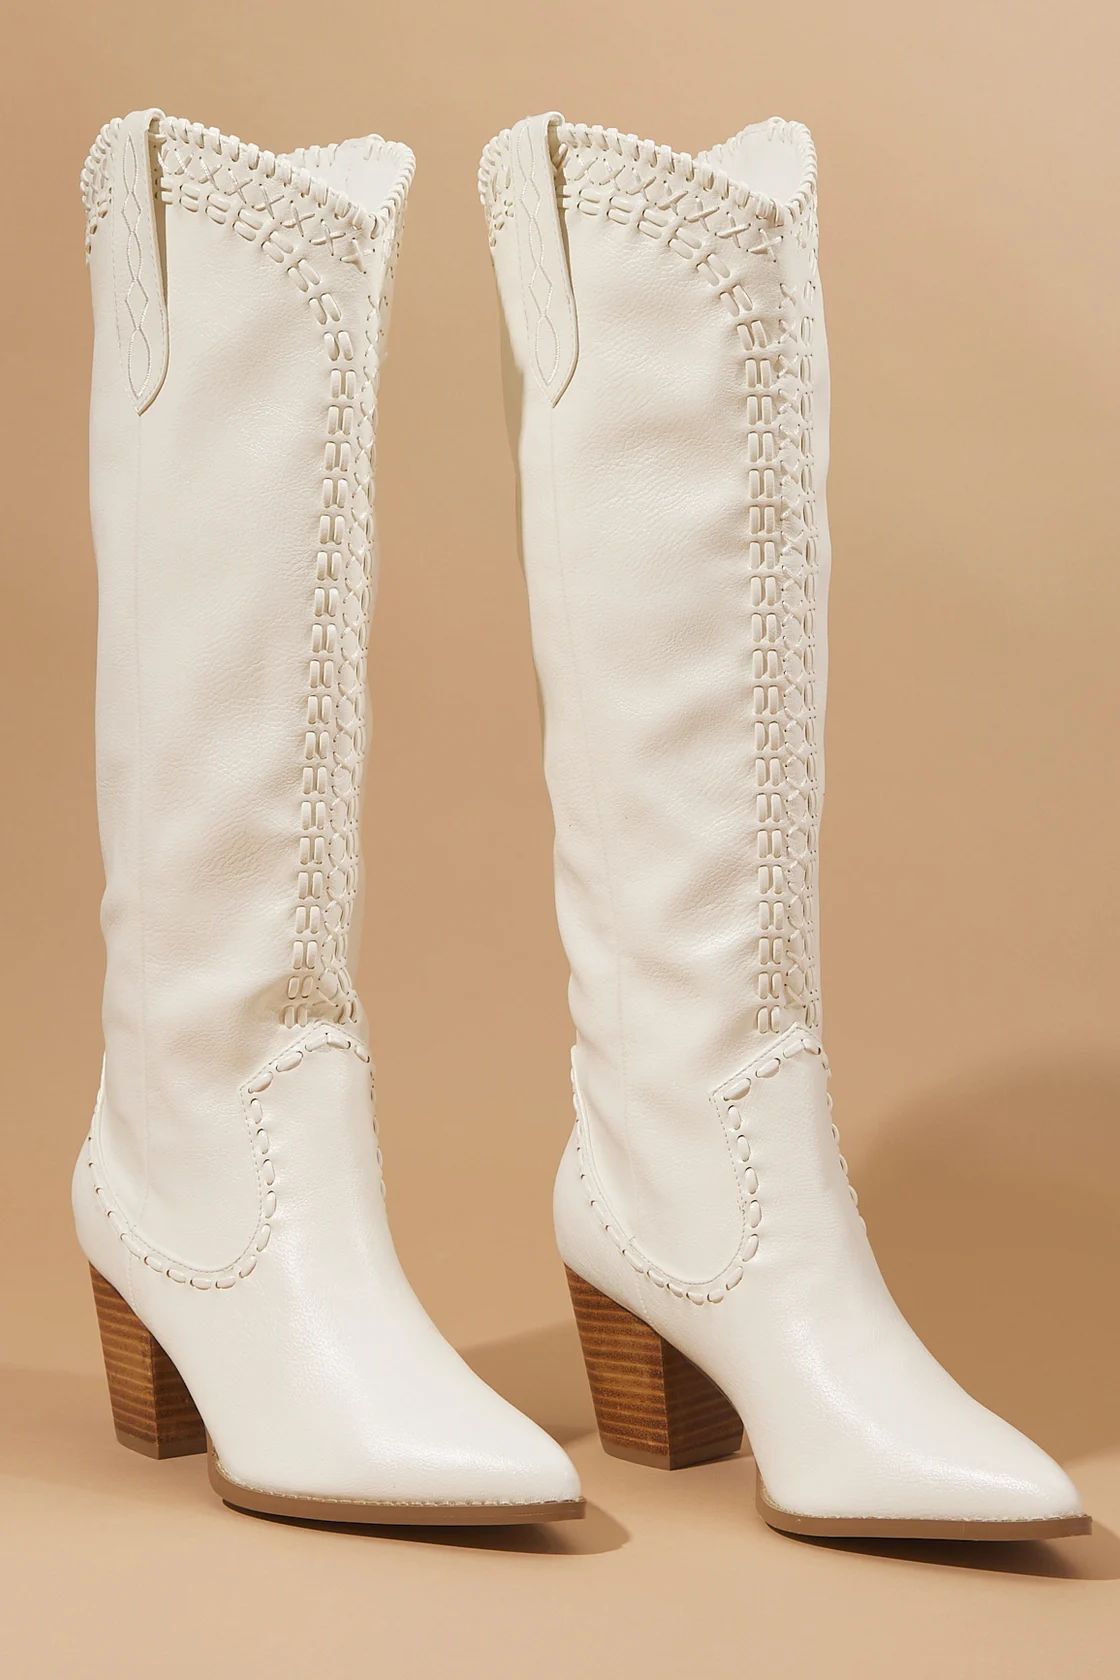 Finley Boots by Billini in White | Altar'd State | Altar'd State